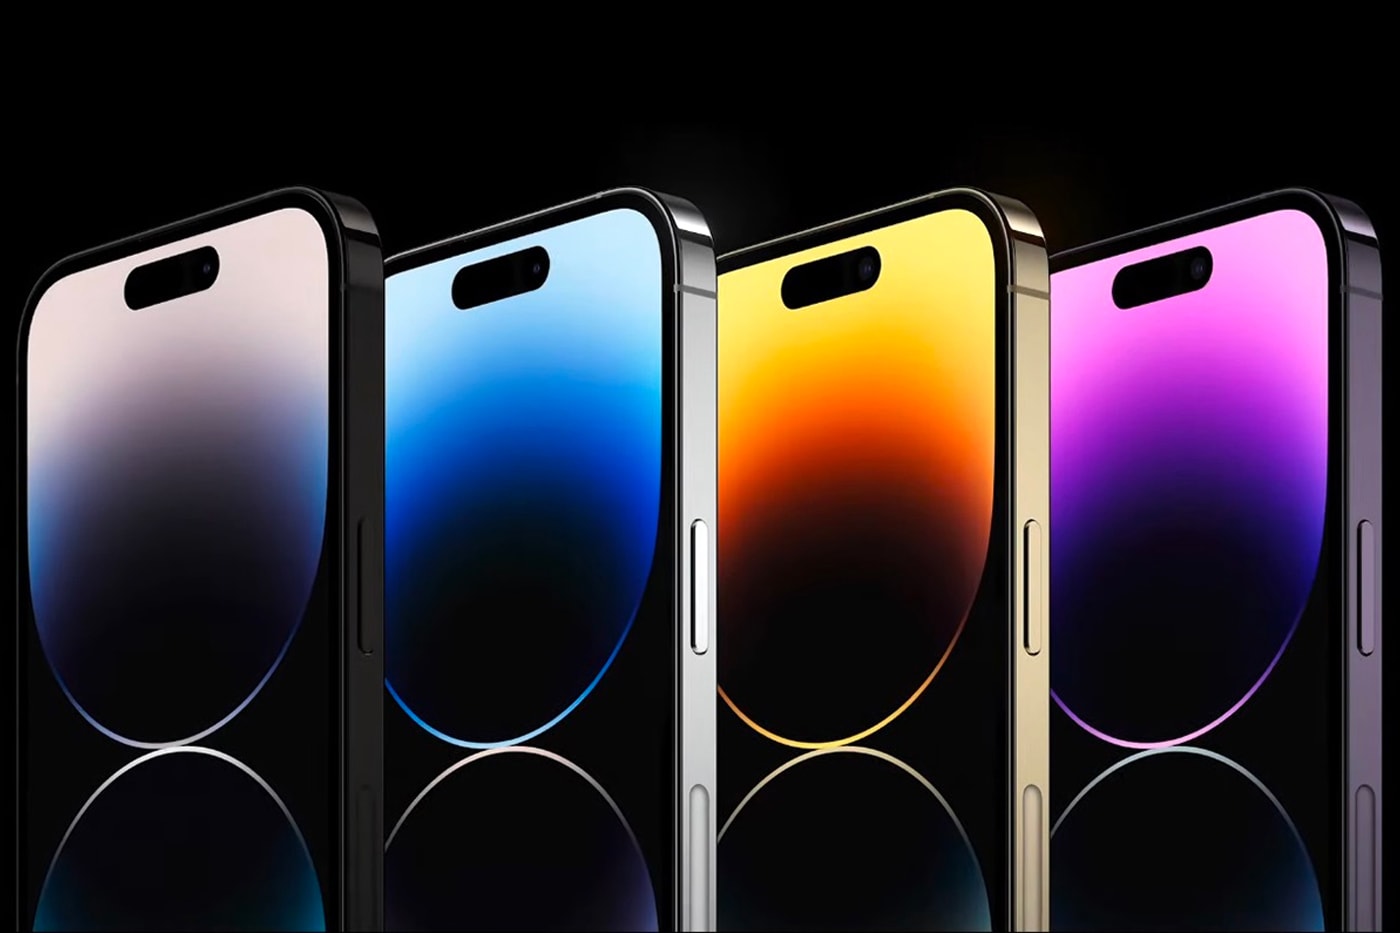 Apple Reveals iPhone 14 Pro and Pro Max With Pill-Shaped Notch and 48-Megapixel Camera